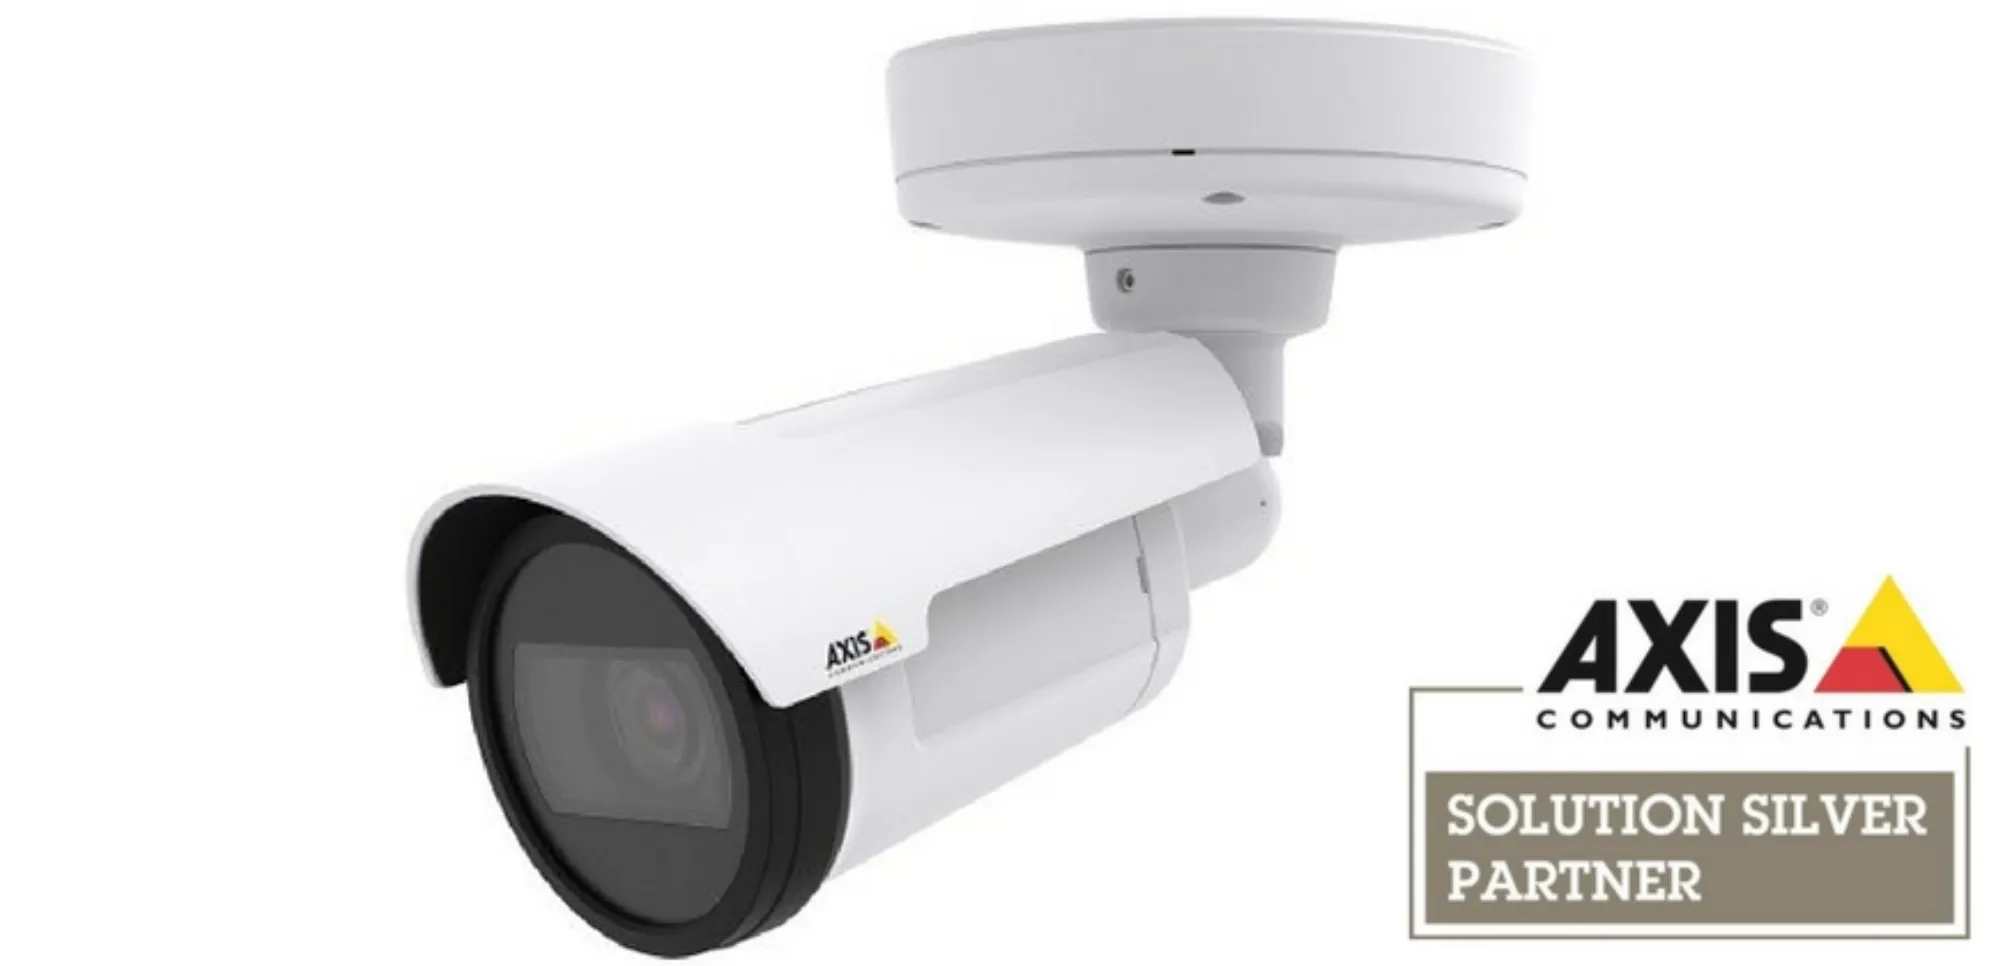 Camera Survelliance - Your eye on the future - An eye on your business or home! Nelson Bays Security